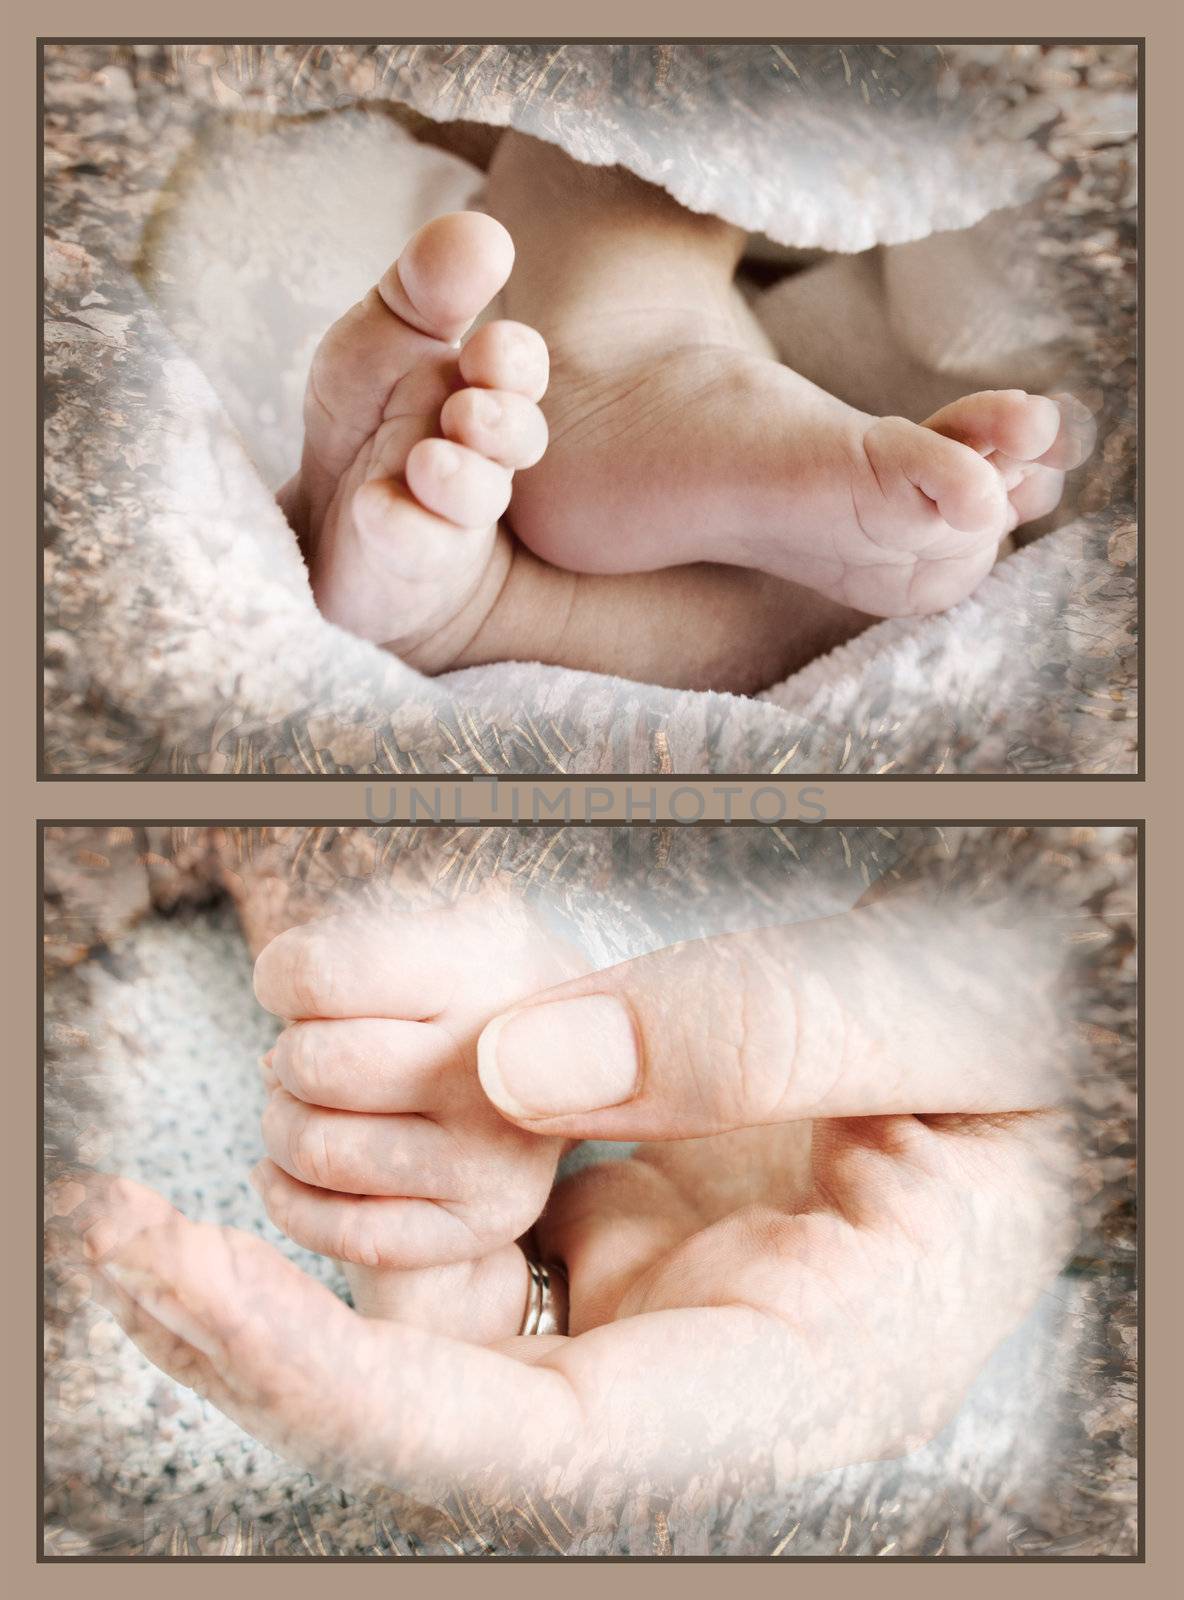 Baby feet and hand by vanell